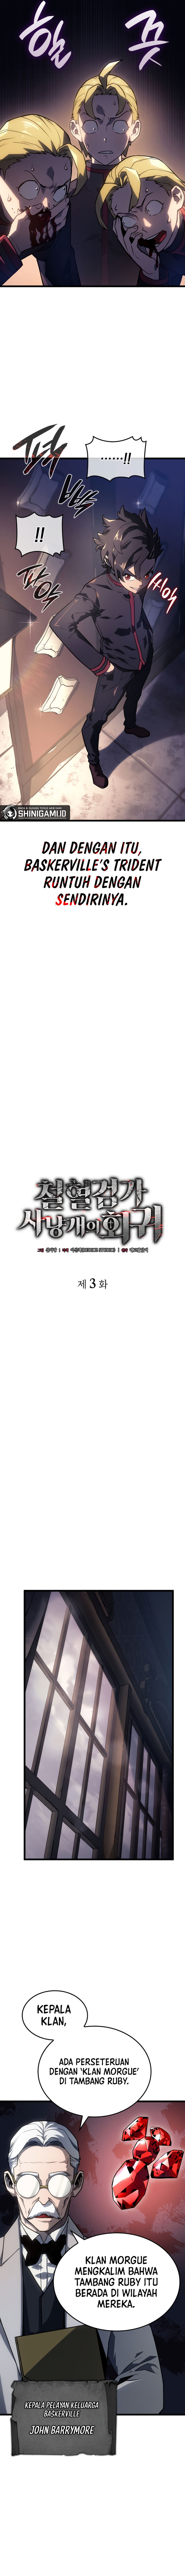 revenge-of-the-iron-blooded-sword-hound Chapter 3